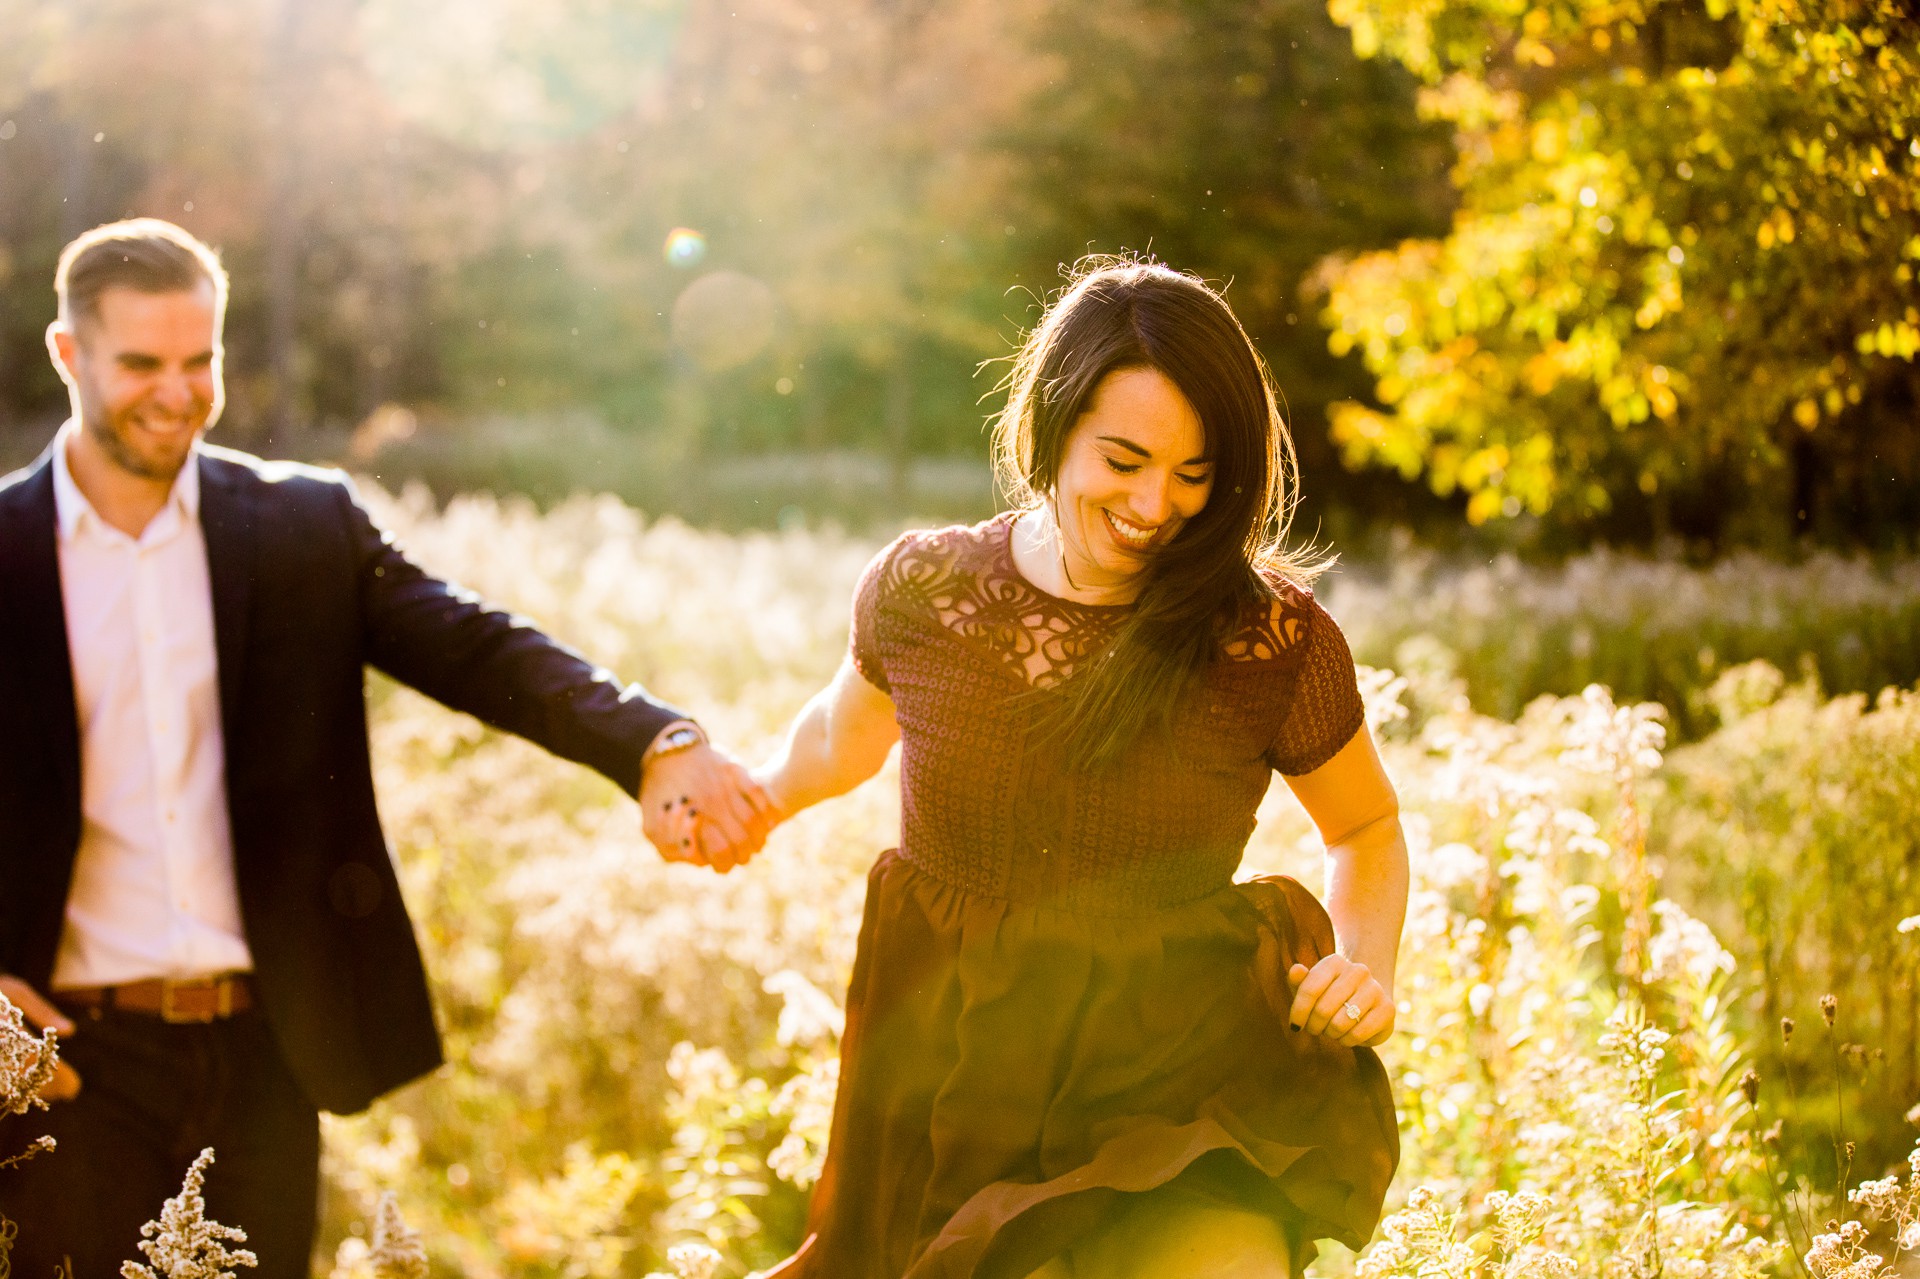 Cleveland Fall Engagement Photos at Patterson Fruit Farm 4.jpg